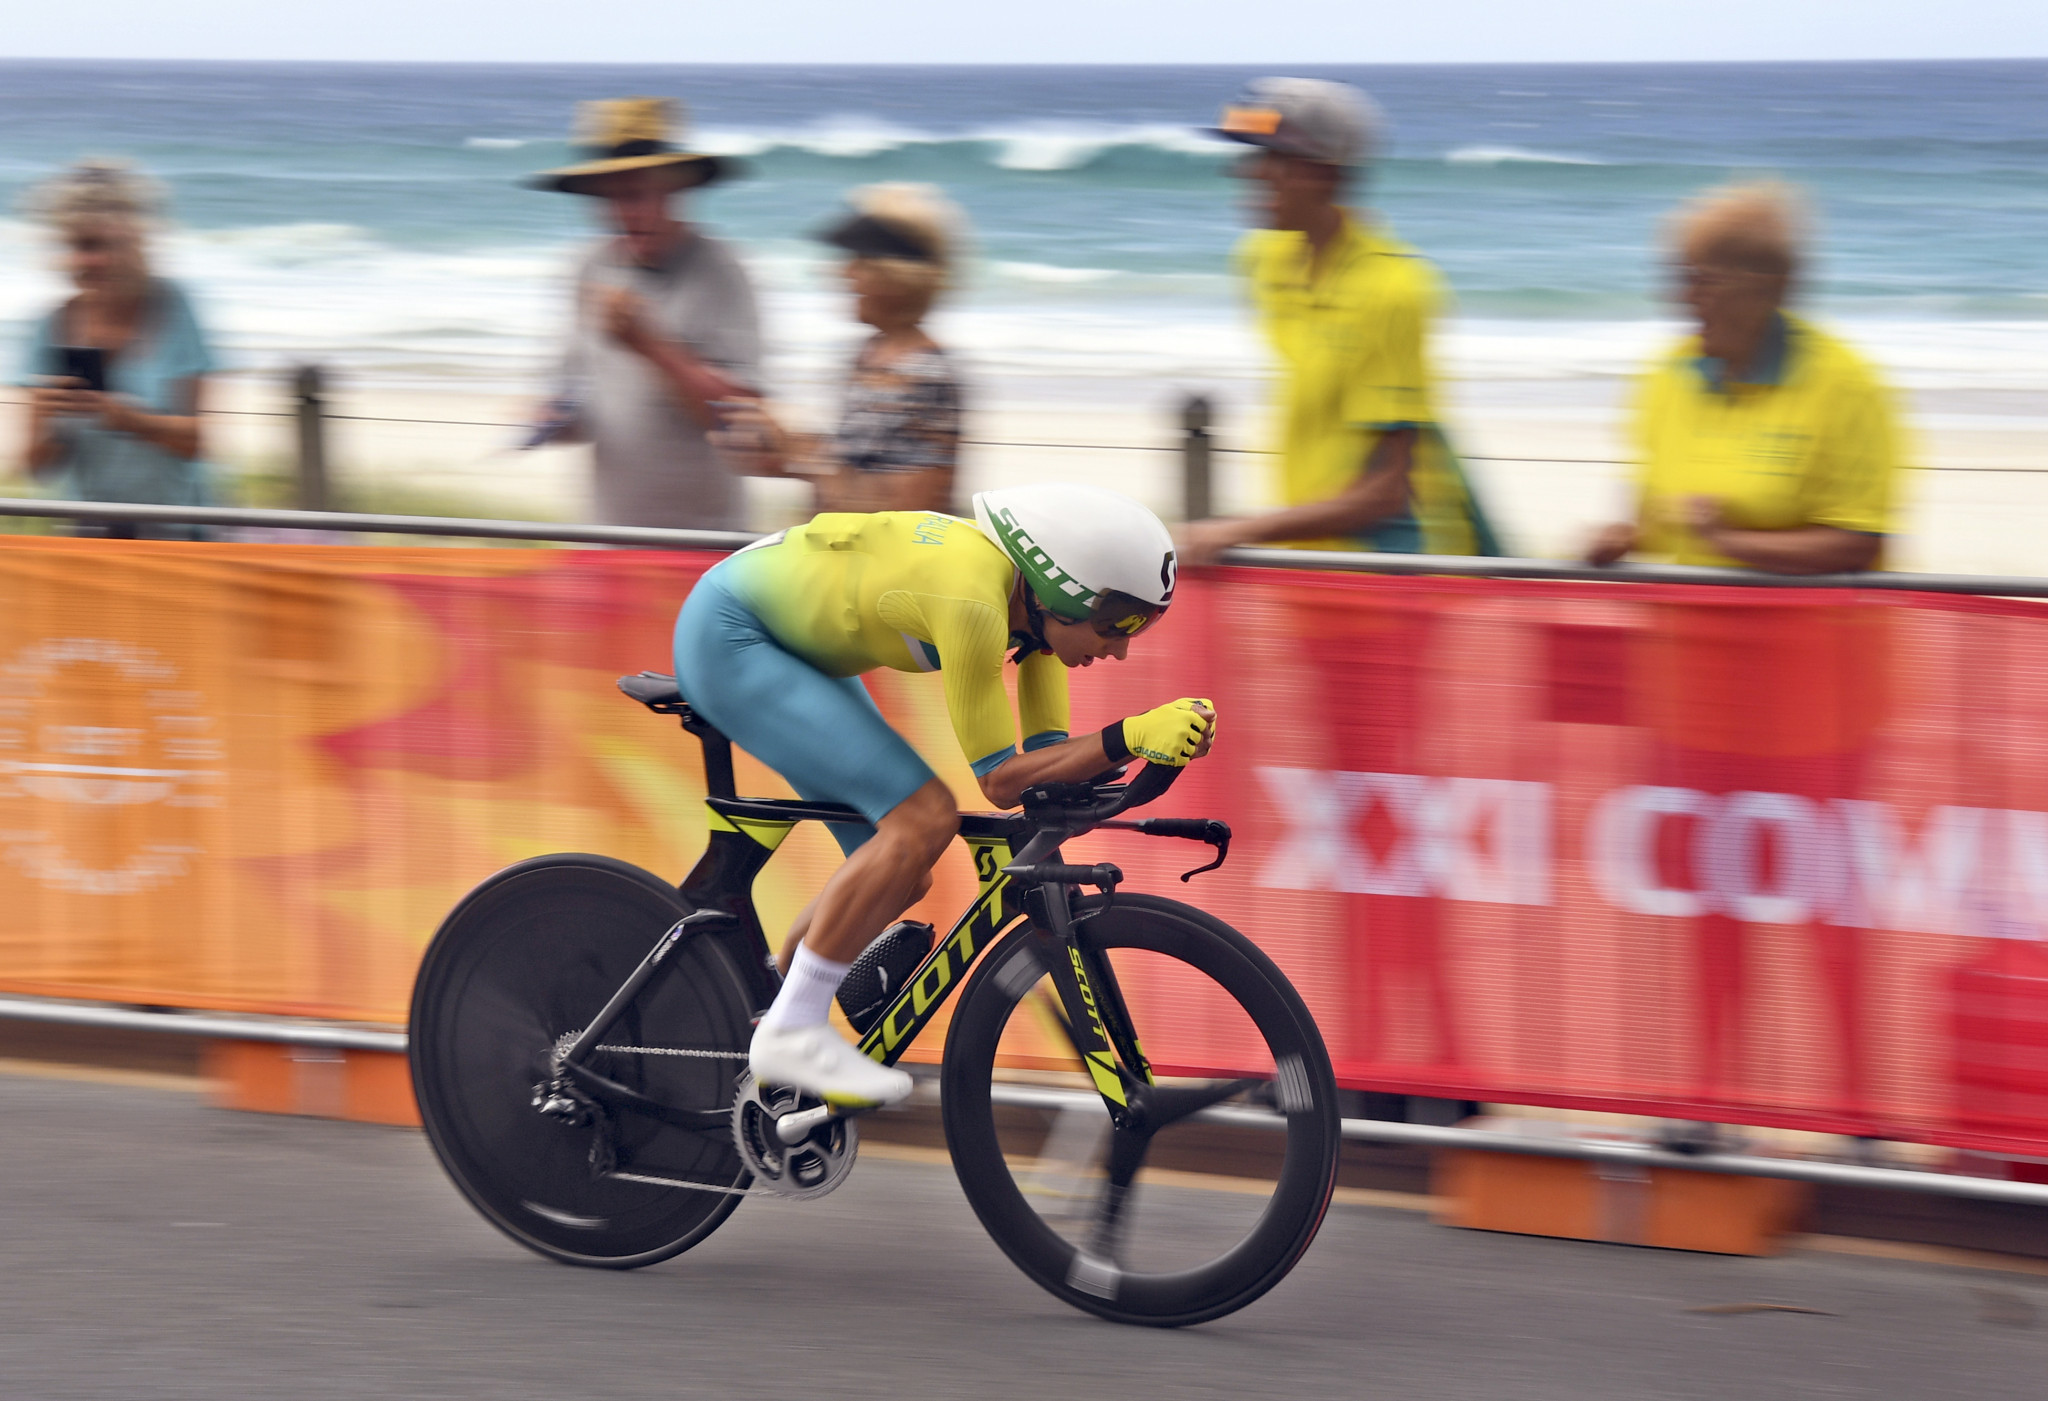 Katrin Garfoot triumphed in the women's individual time trial ©Getty Images